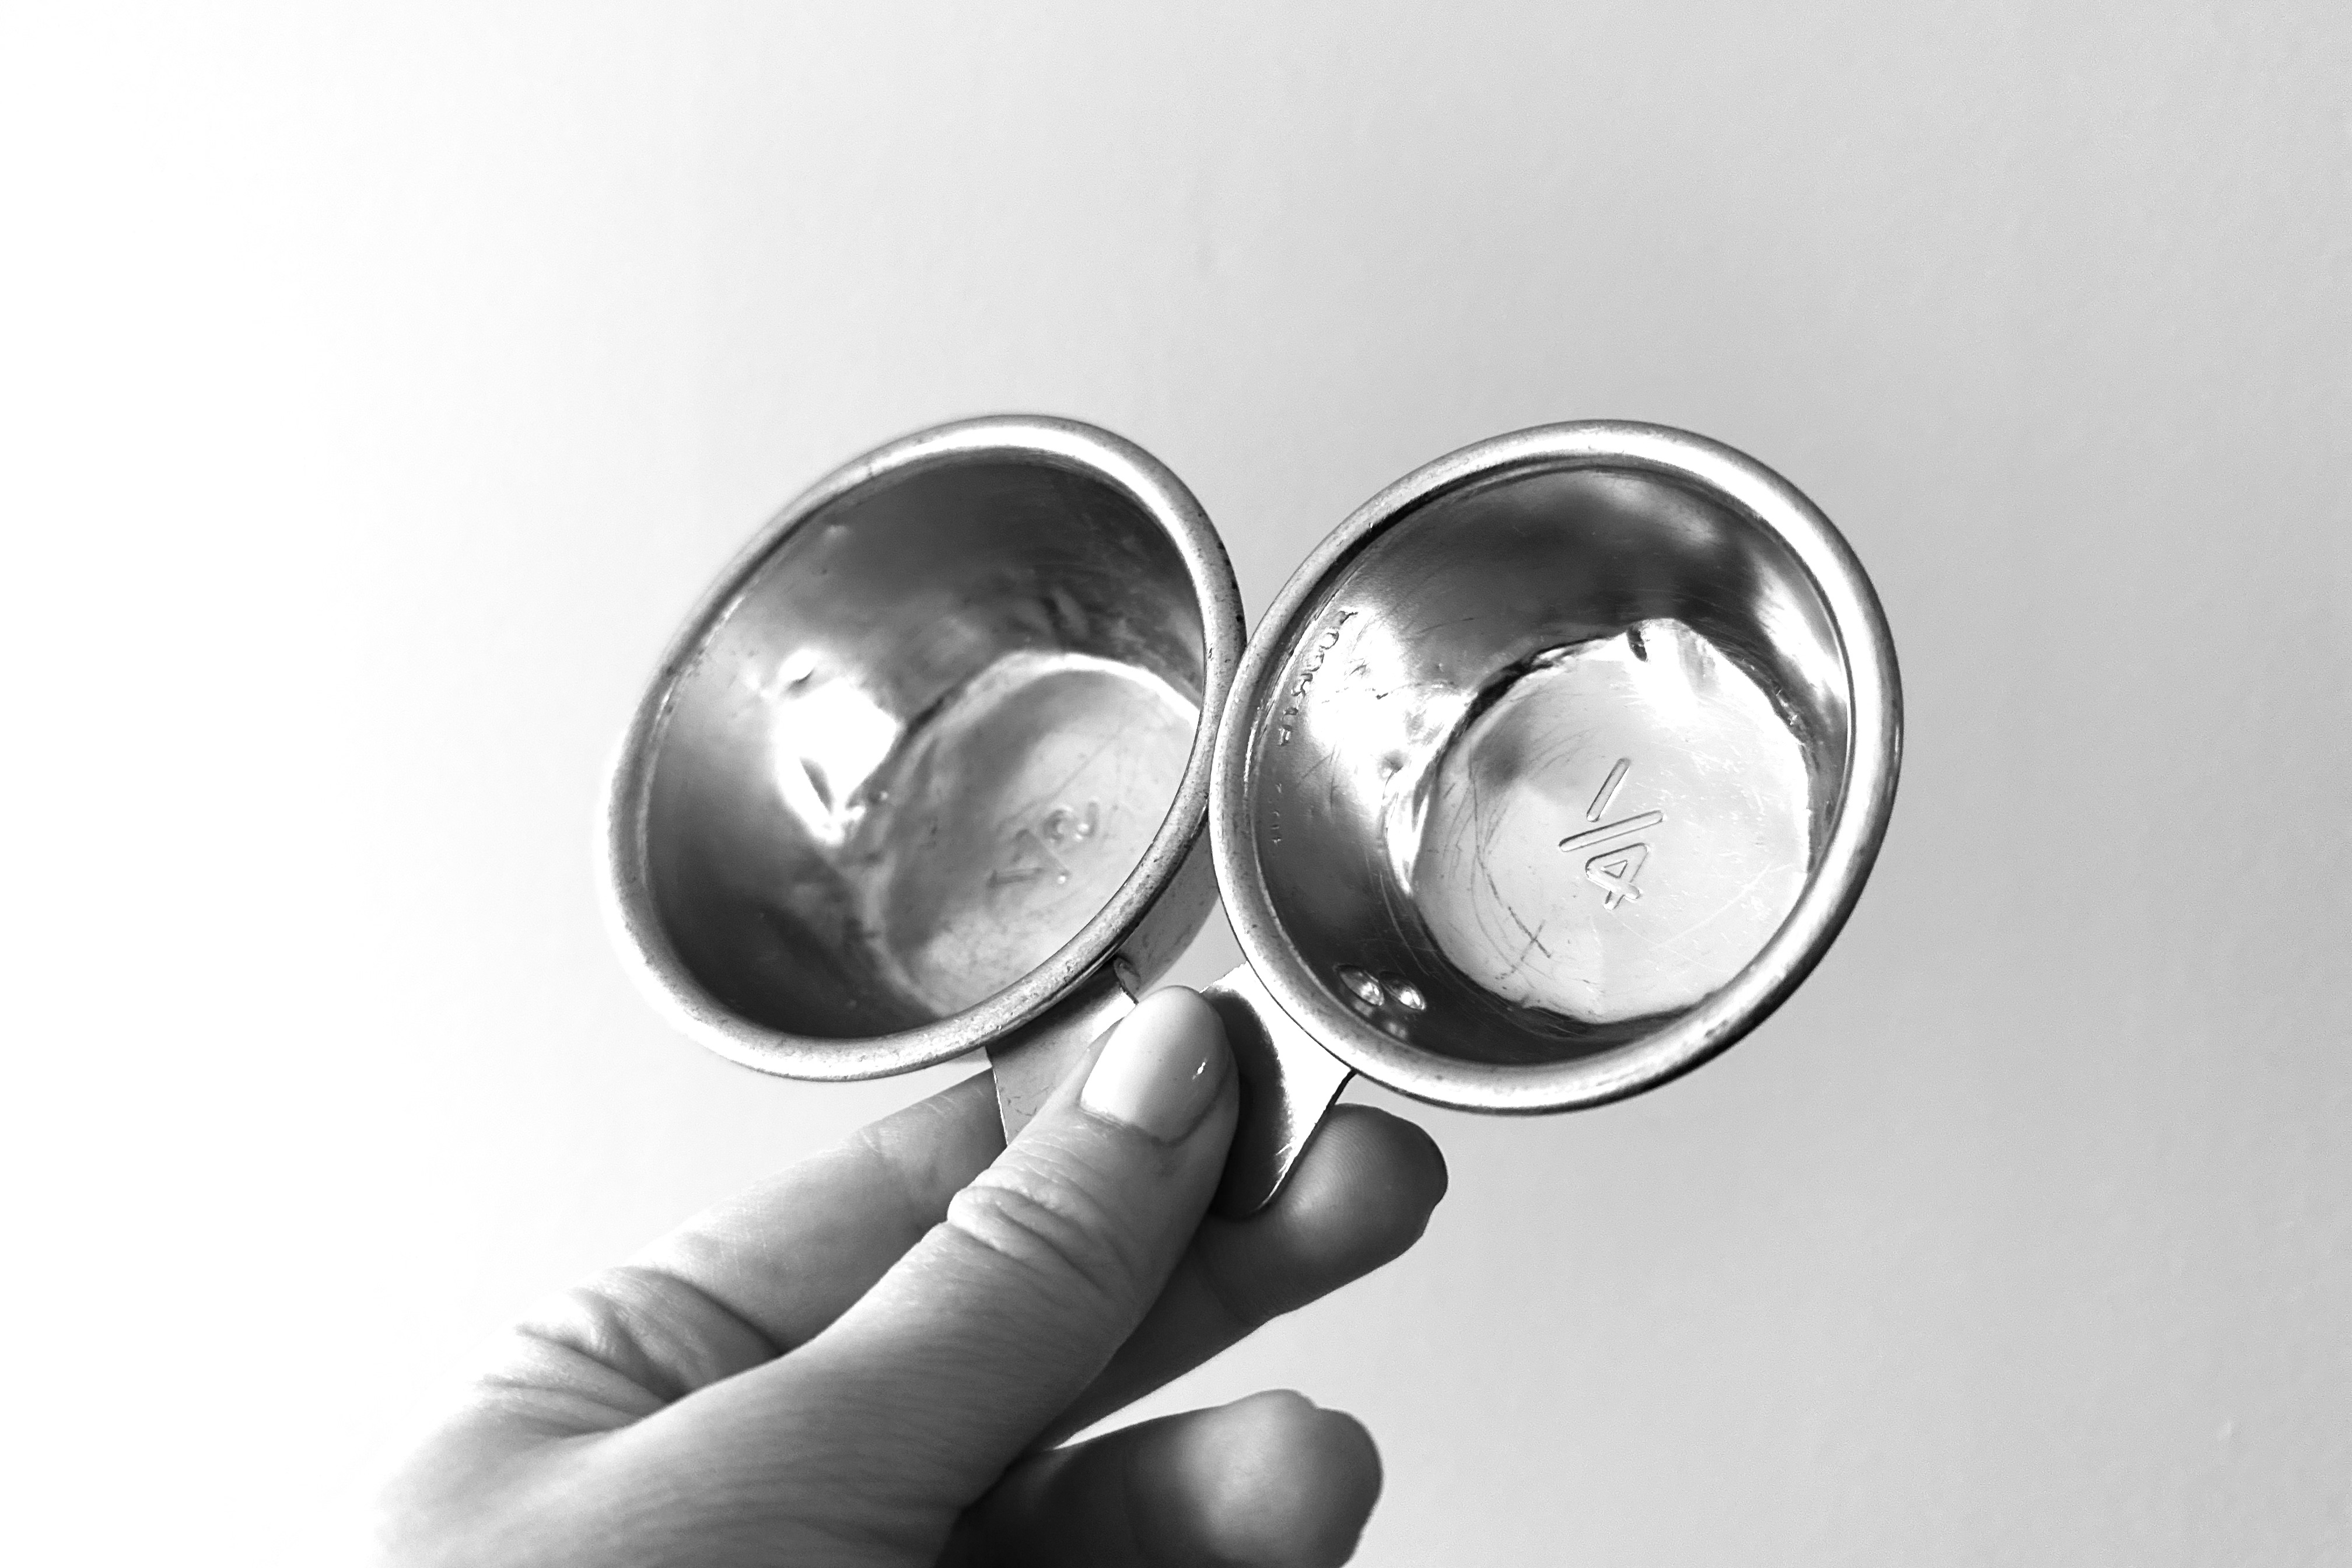 A hand holds up two vintage measuring cups by the handle.